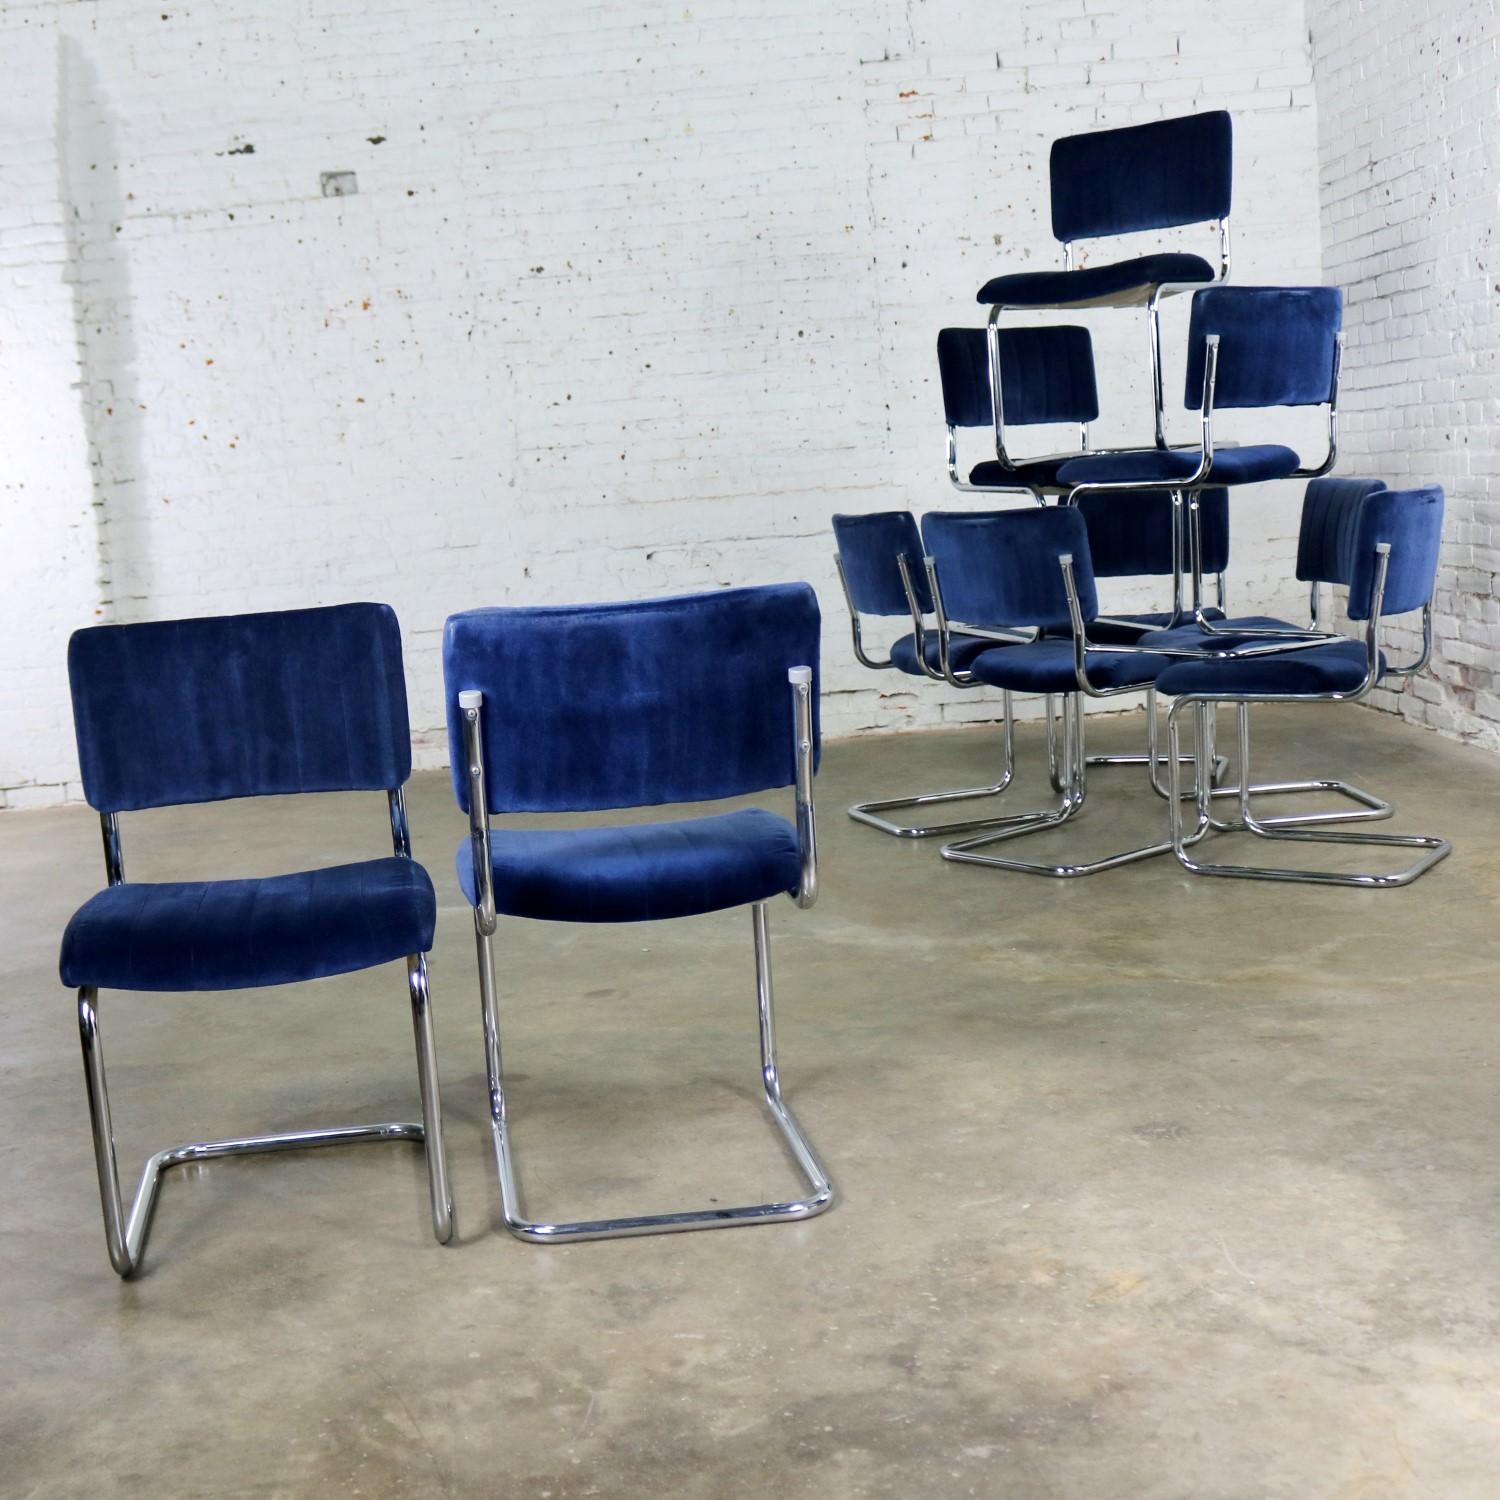 20th Century Cantilevered Chrome and Blue Velvet Dining Chairs after Marcel Breuer Cesca